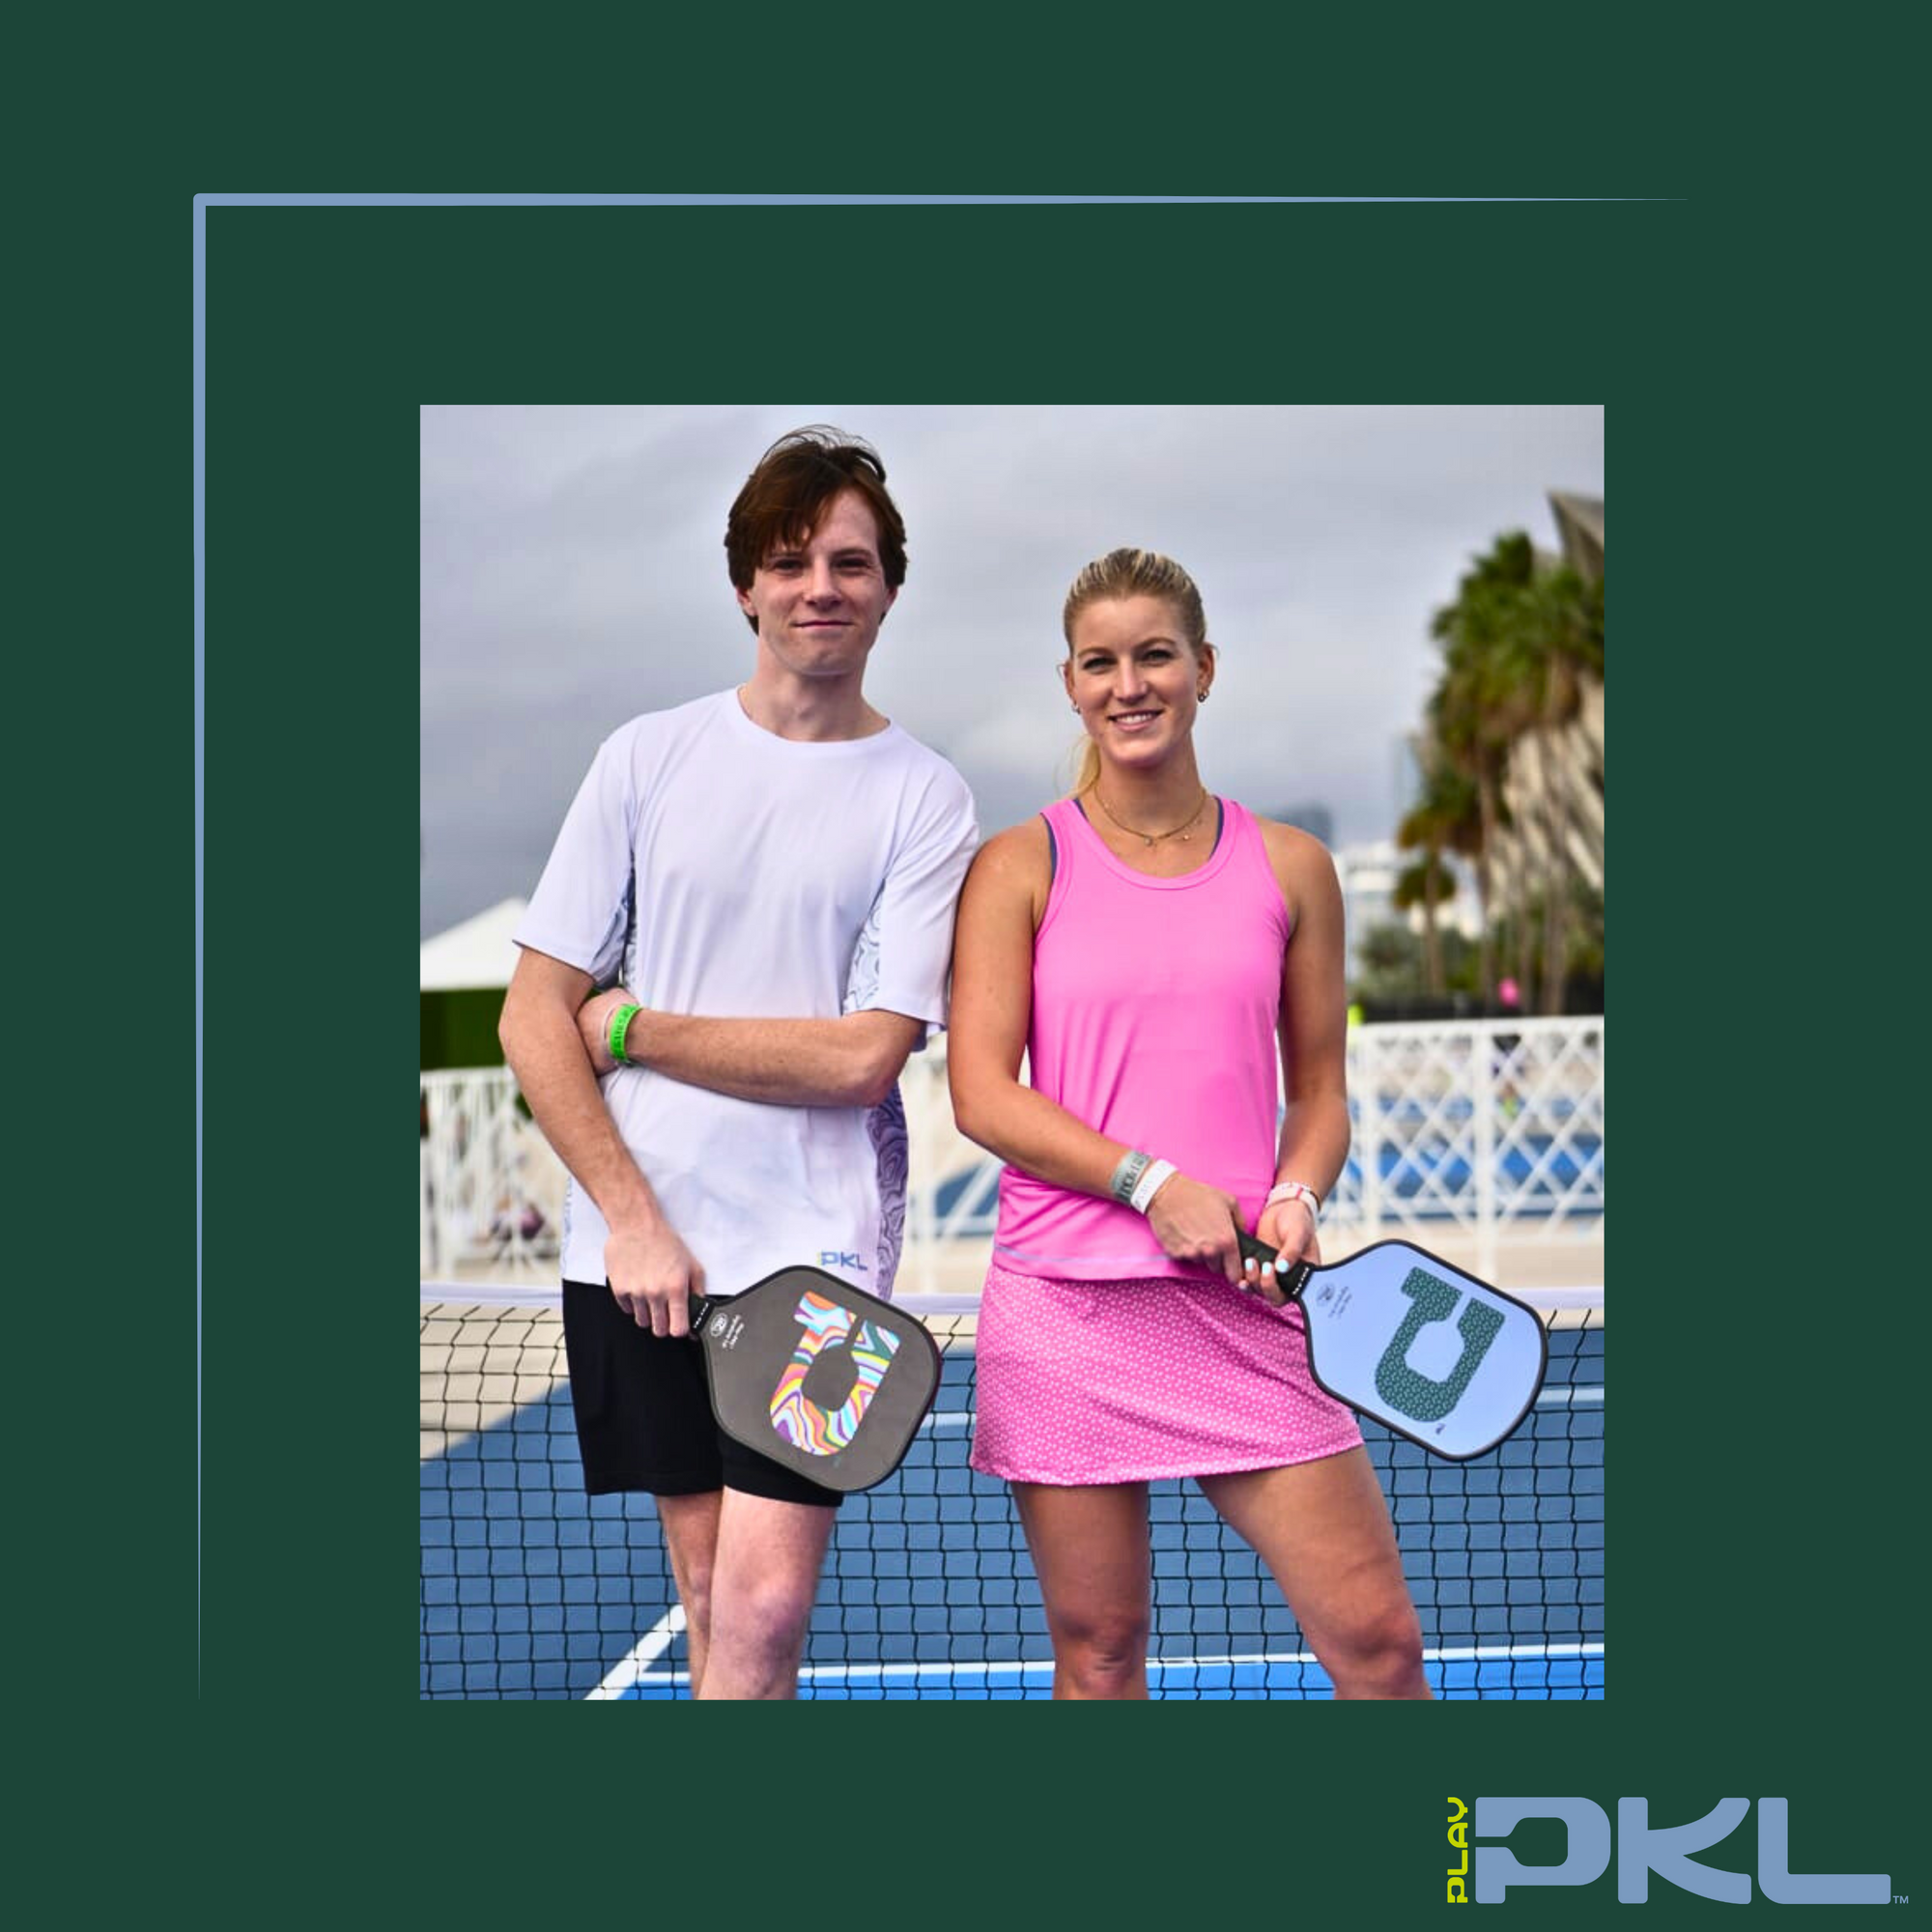 5 Doubles Strategies to Improve Your Pickleball Game